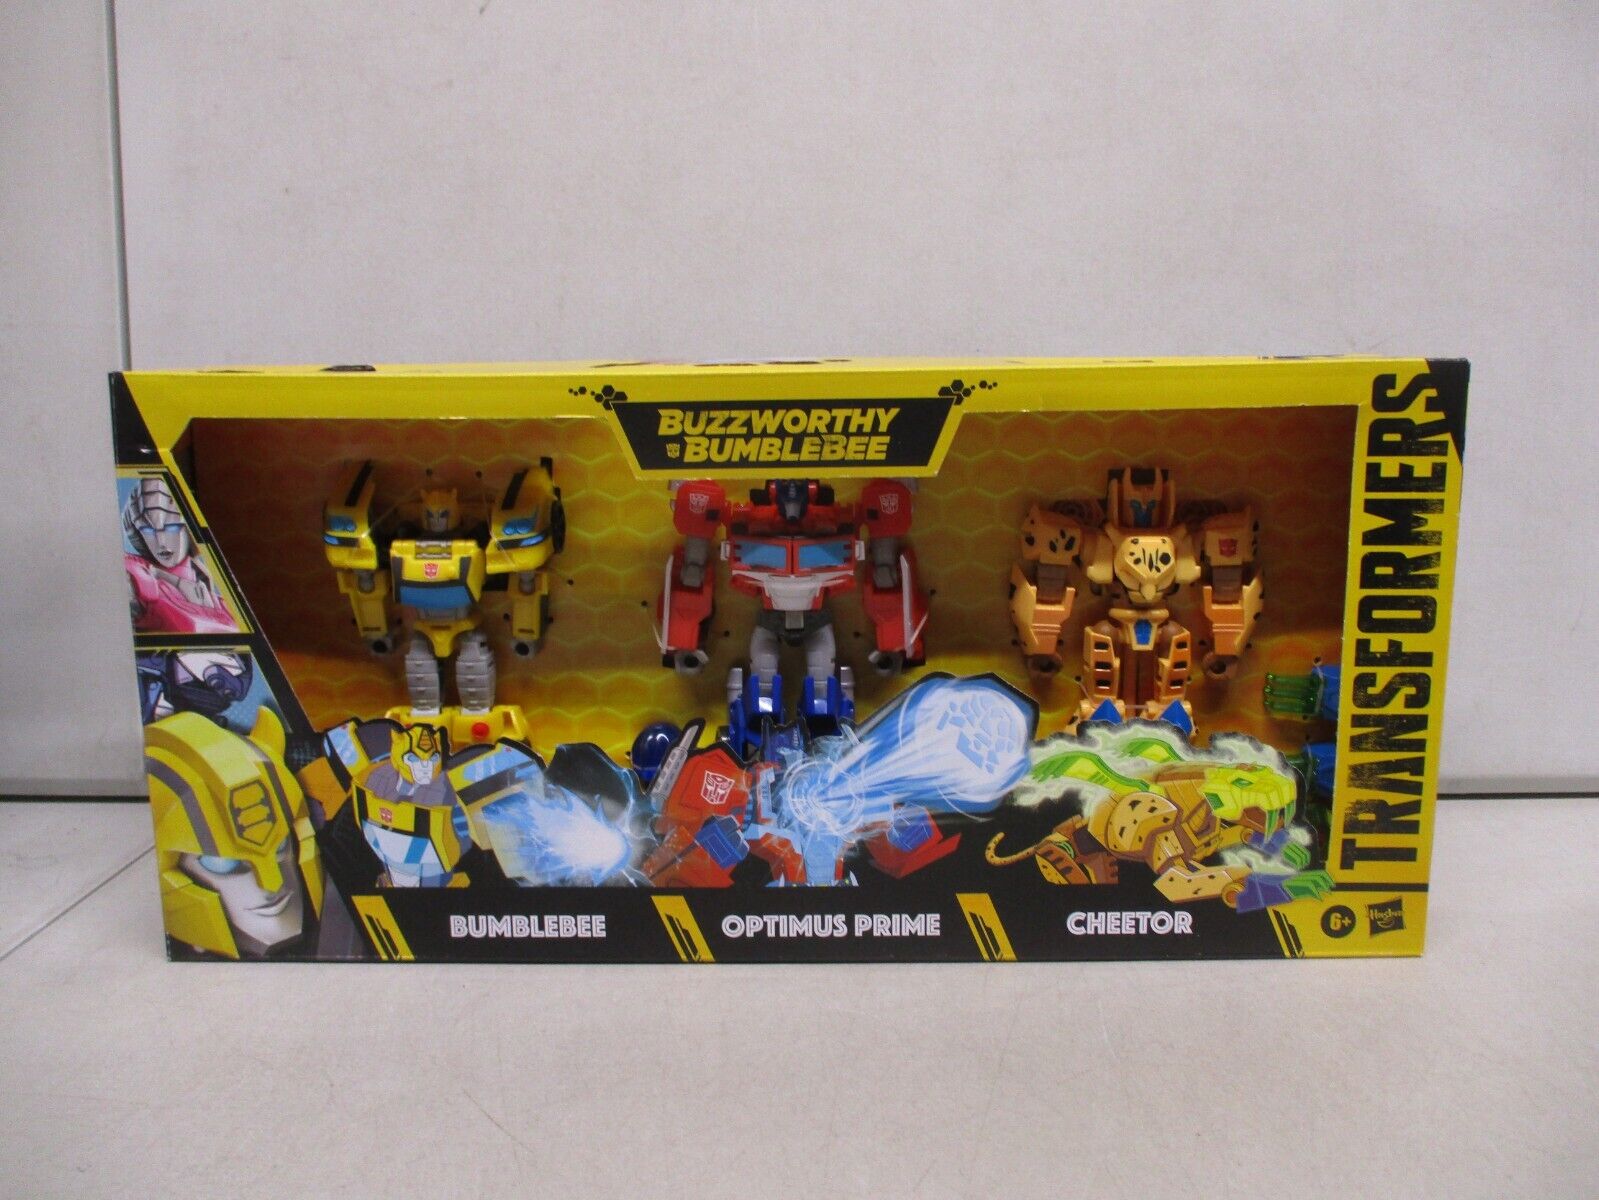 2022 Transformers Buzzworthy Bumblebee with Optimus Prime and Cheetor lot 1